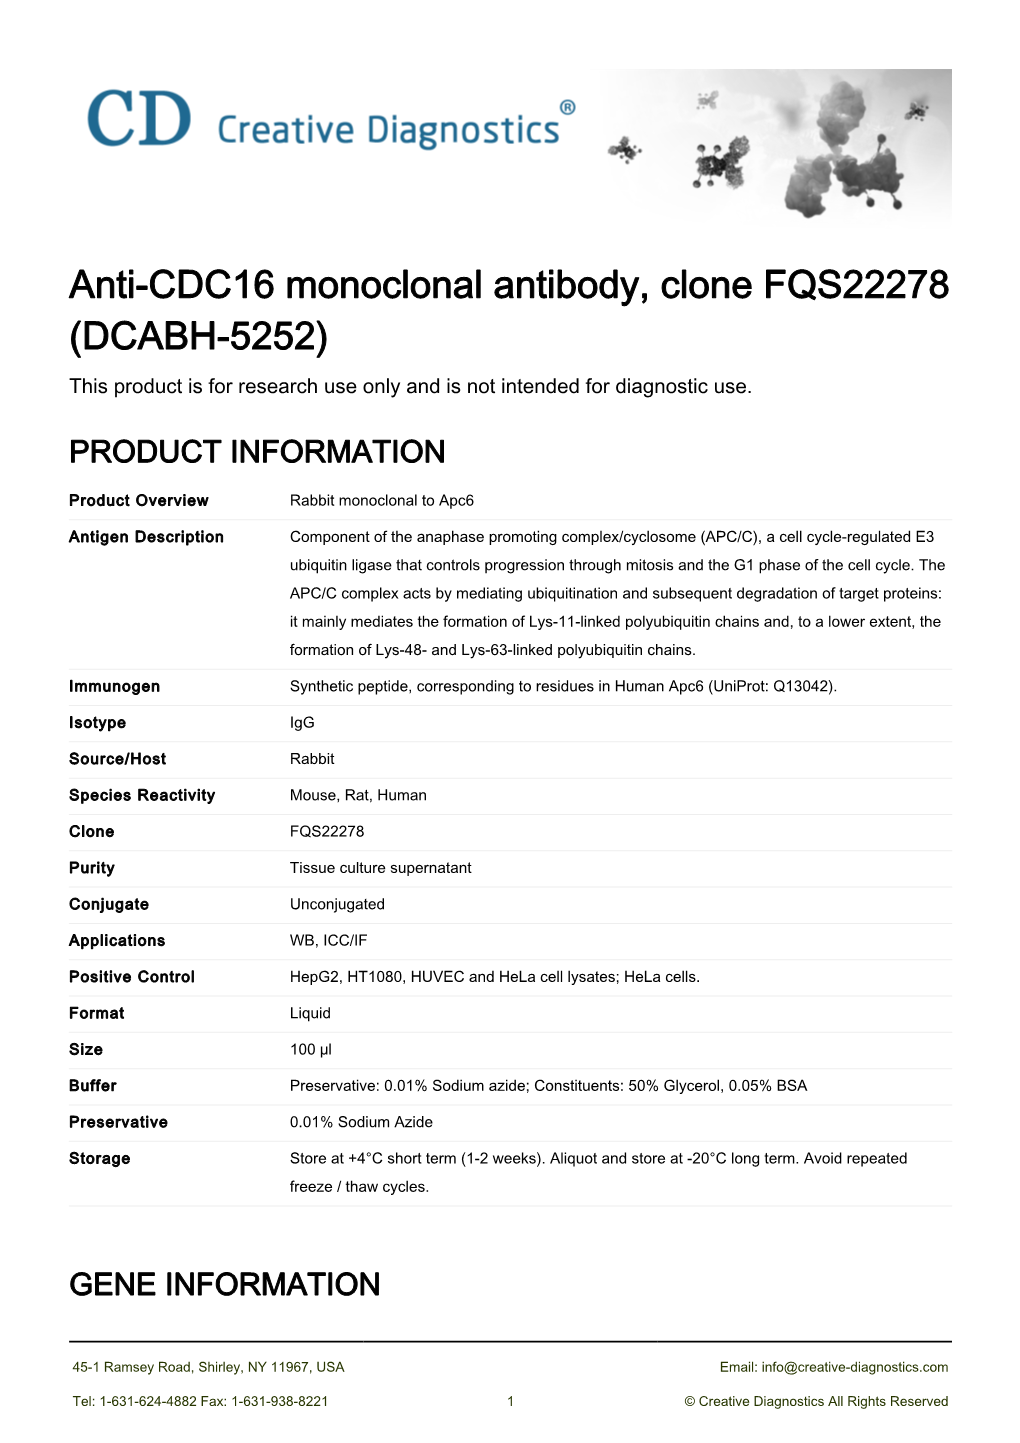 Anti-CDC16 Monoclonal Antibody, Clone FQS22278 (DCABH-5252) This Product Is for Research Use Only and Is Not Intended for Diagnostic Use